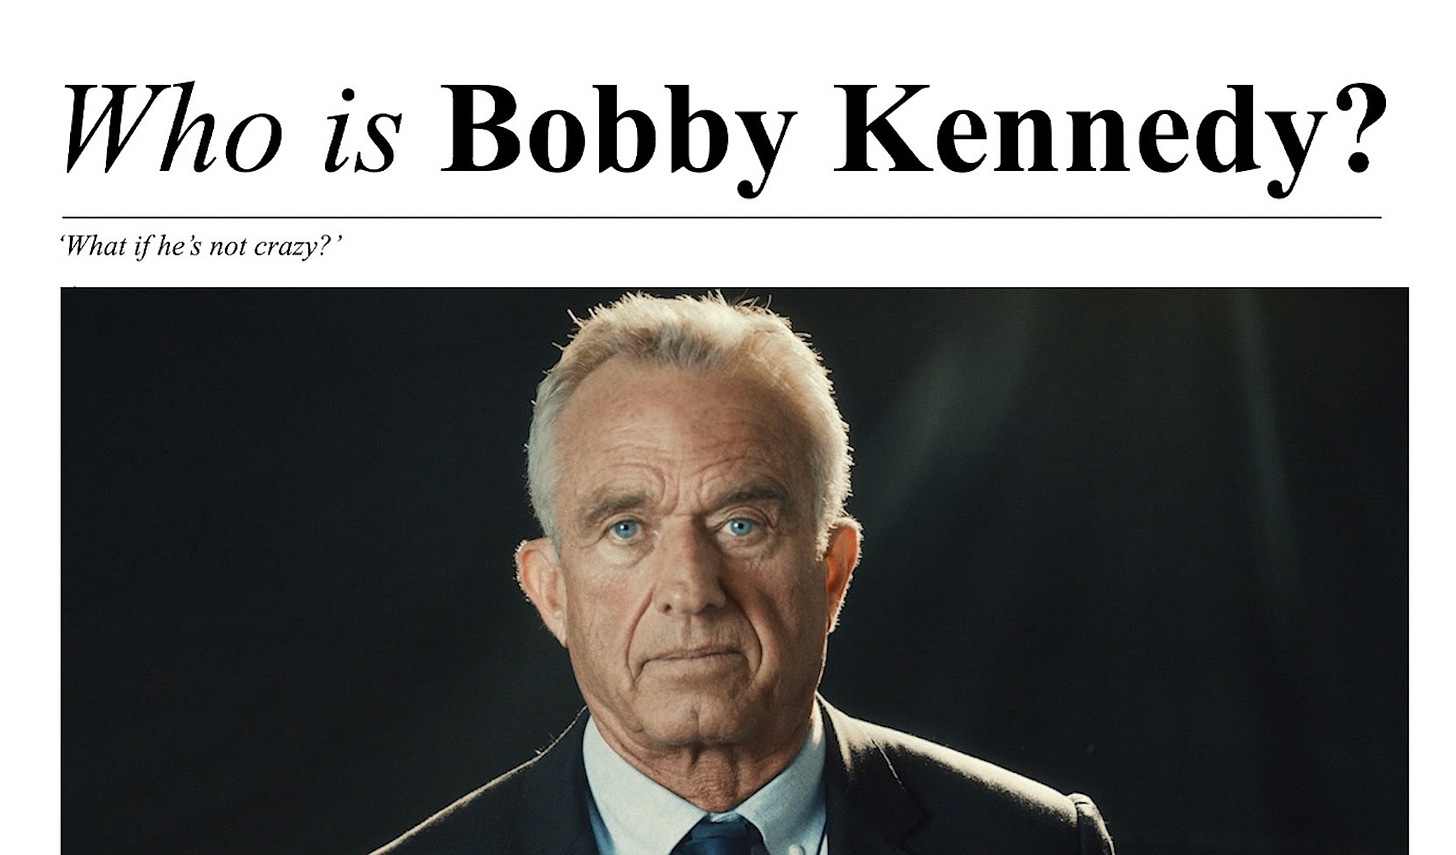 ‘Who is Bobby Kennedy?’